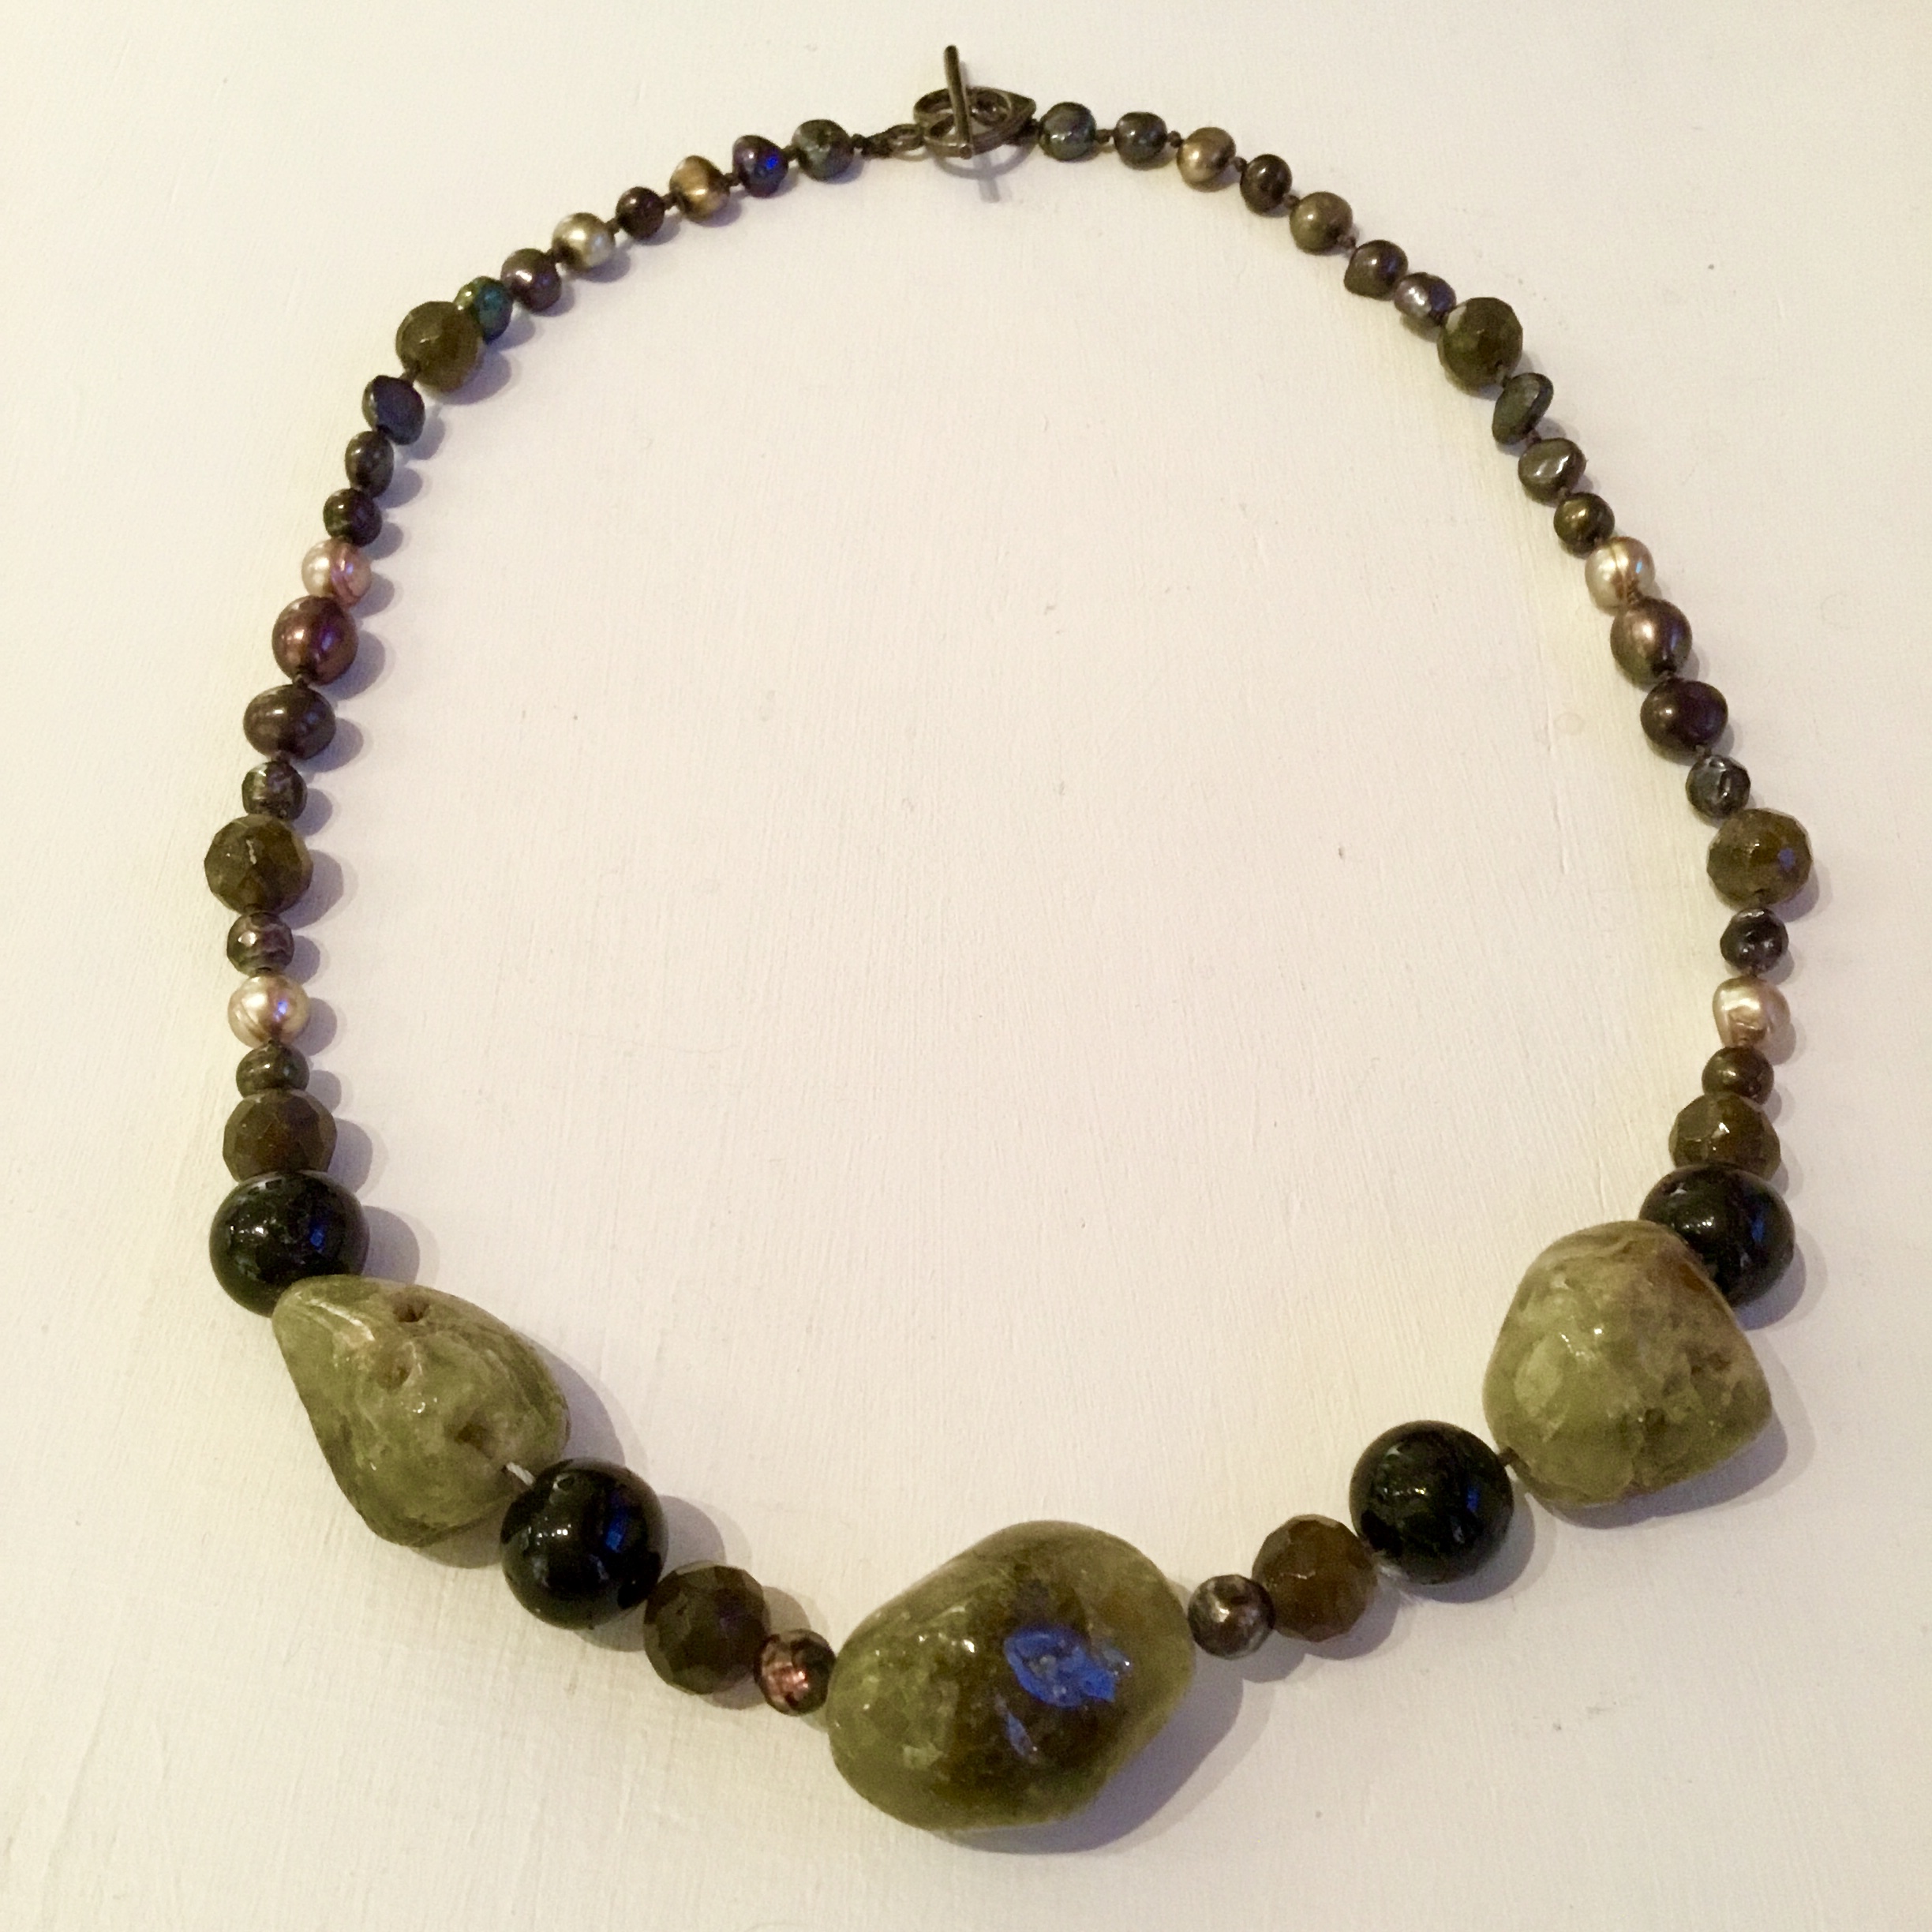 Green garnet, black tourmaline, labradorite &amp; pearl necklace with sterling silver clasp 17 1/2”